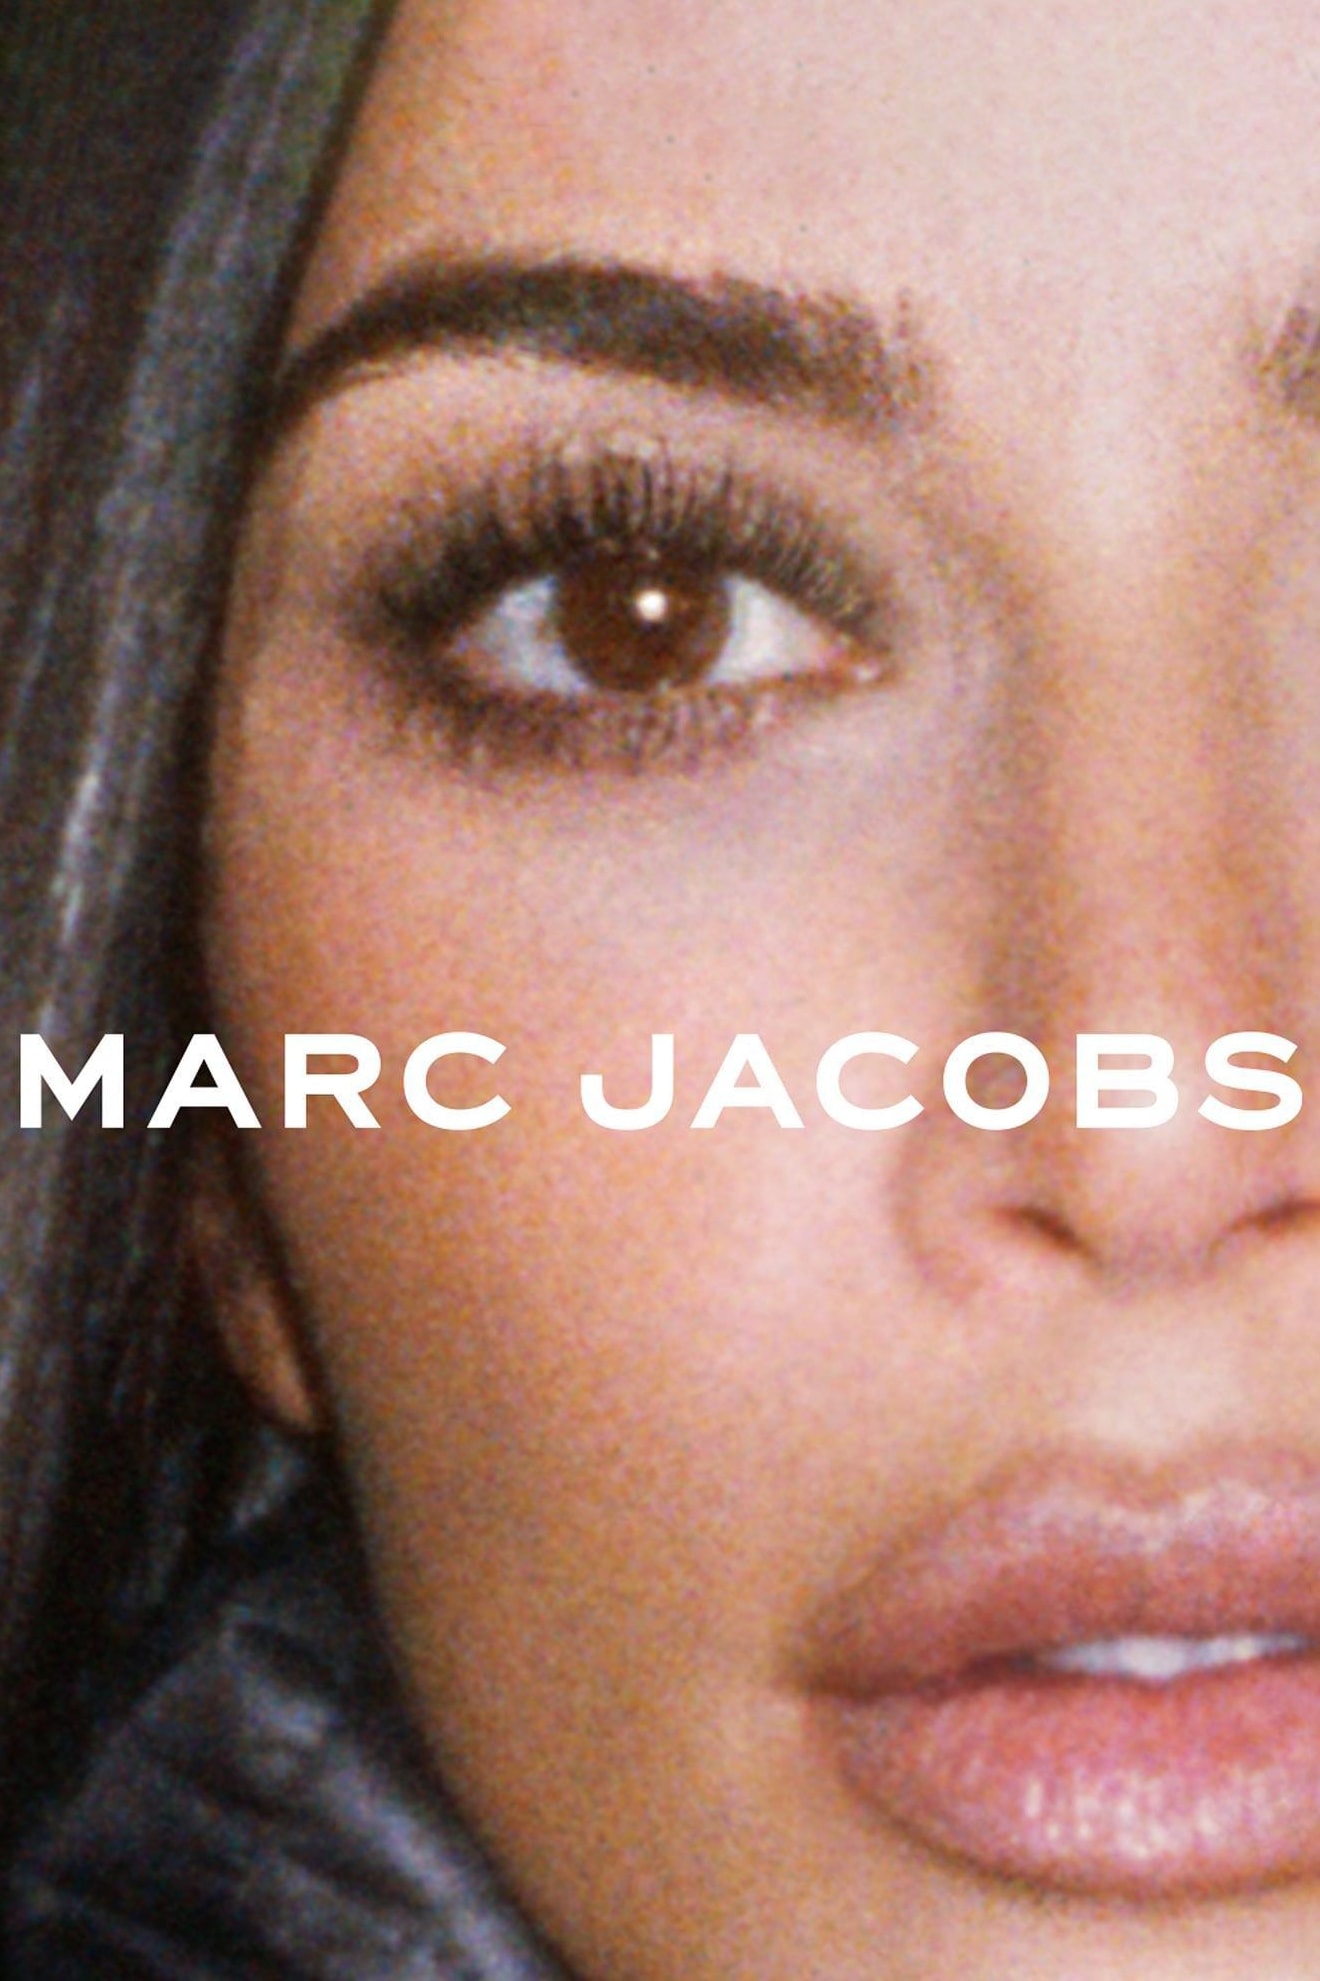 Marc Jacobs breaks down his new label: THE Marc Jacobs